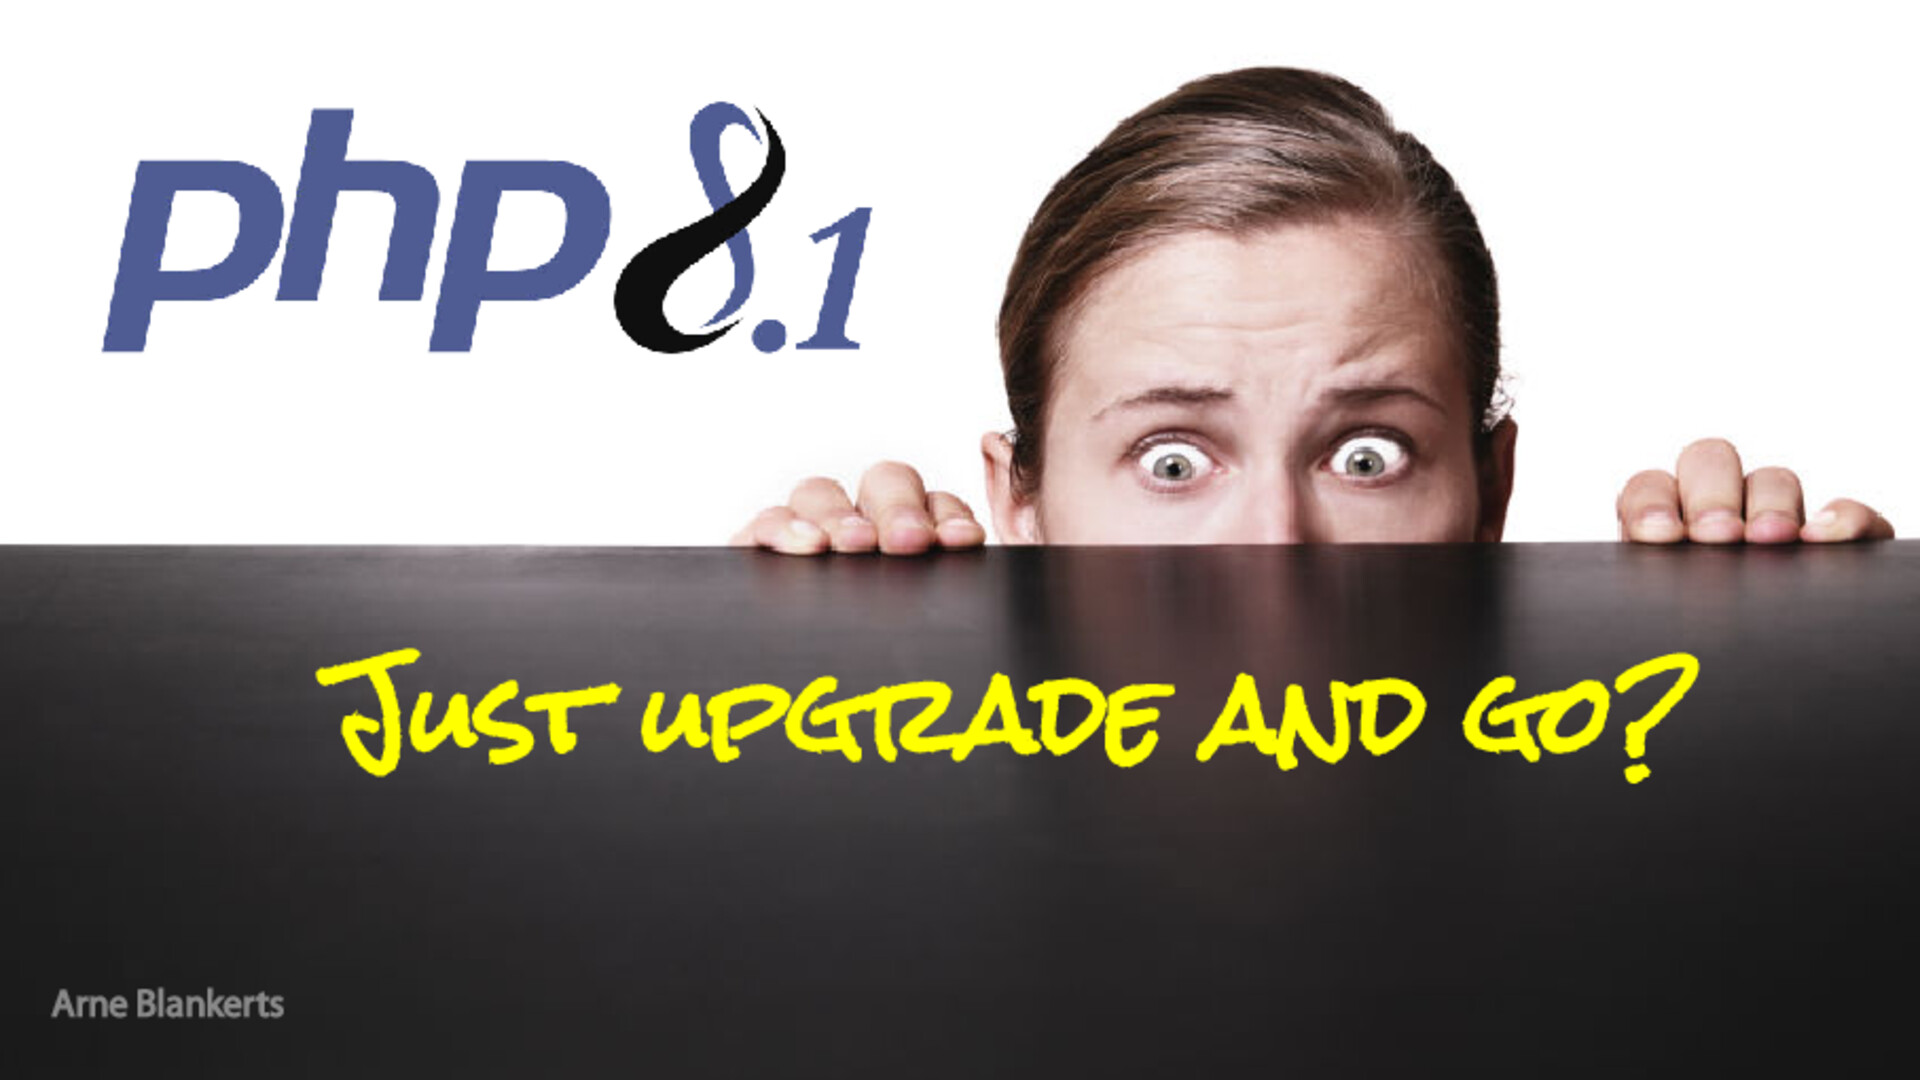 PHP 8.1: Just upgrade and go?